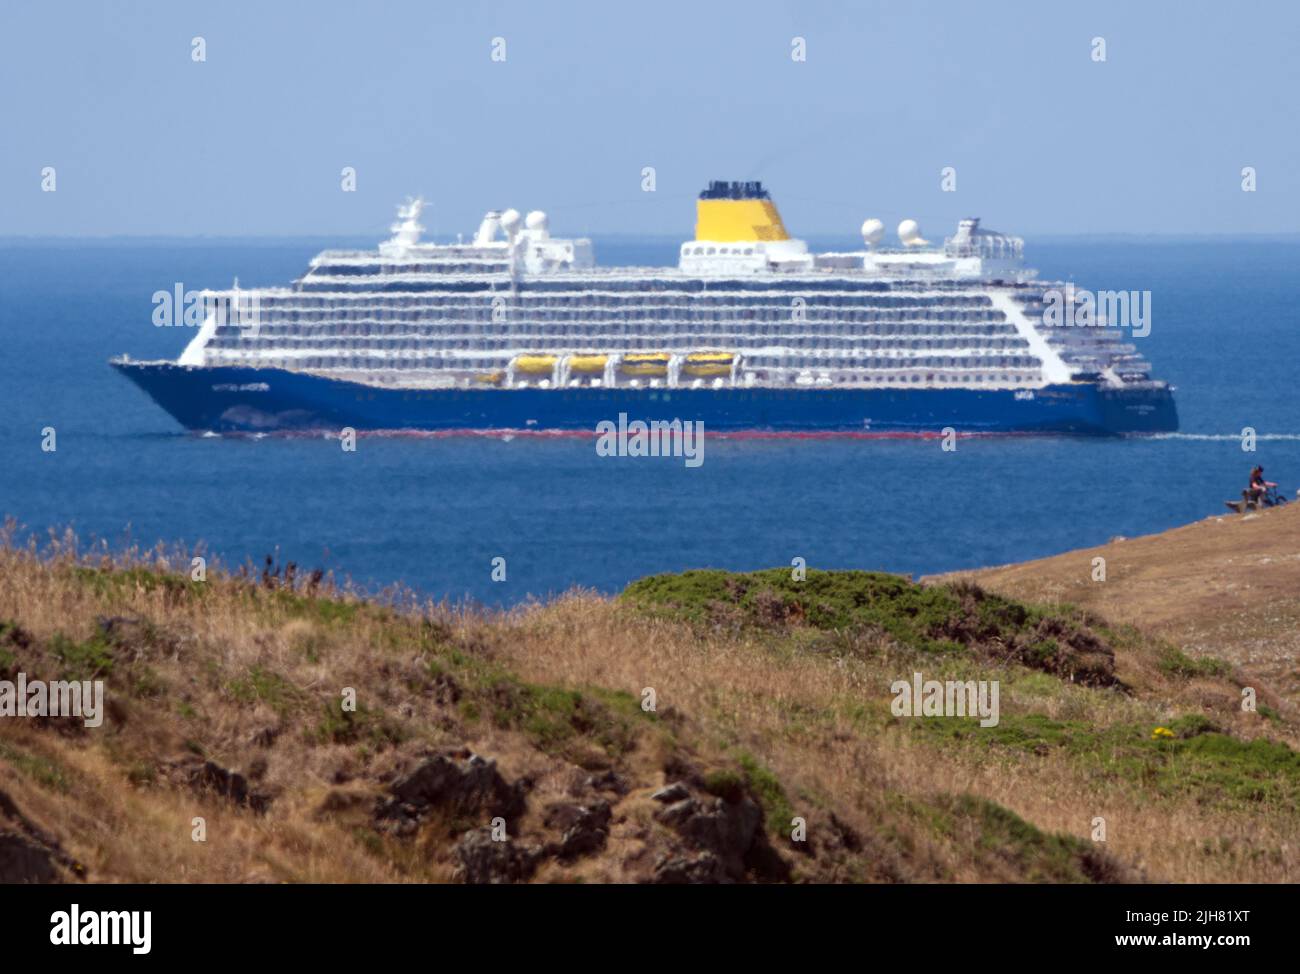 Newquay, UK. 16th July, 2022. UK Weather A very rare sail past from a cruise ship on North Cornwall’s rugged north coast. The Spirit of Adventure with 1000 passengers and over 500 crew members is en route from Belfast to Breast in France. Visitors and locals watch from East Pentire Headland and The Lewannick lodge hotel as the spectacle passes. As no suitable ports are available for large ships on this coast, visits are rare. 16th July 2022.      Robert Taylor Alamy Live News Credit: Robert Taylor/Alamy Live News Stock Photo